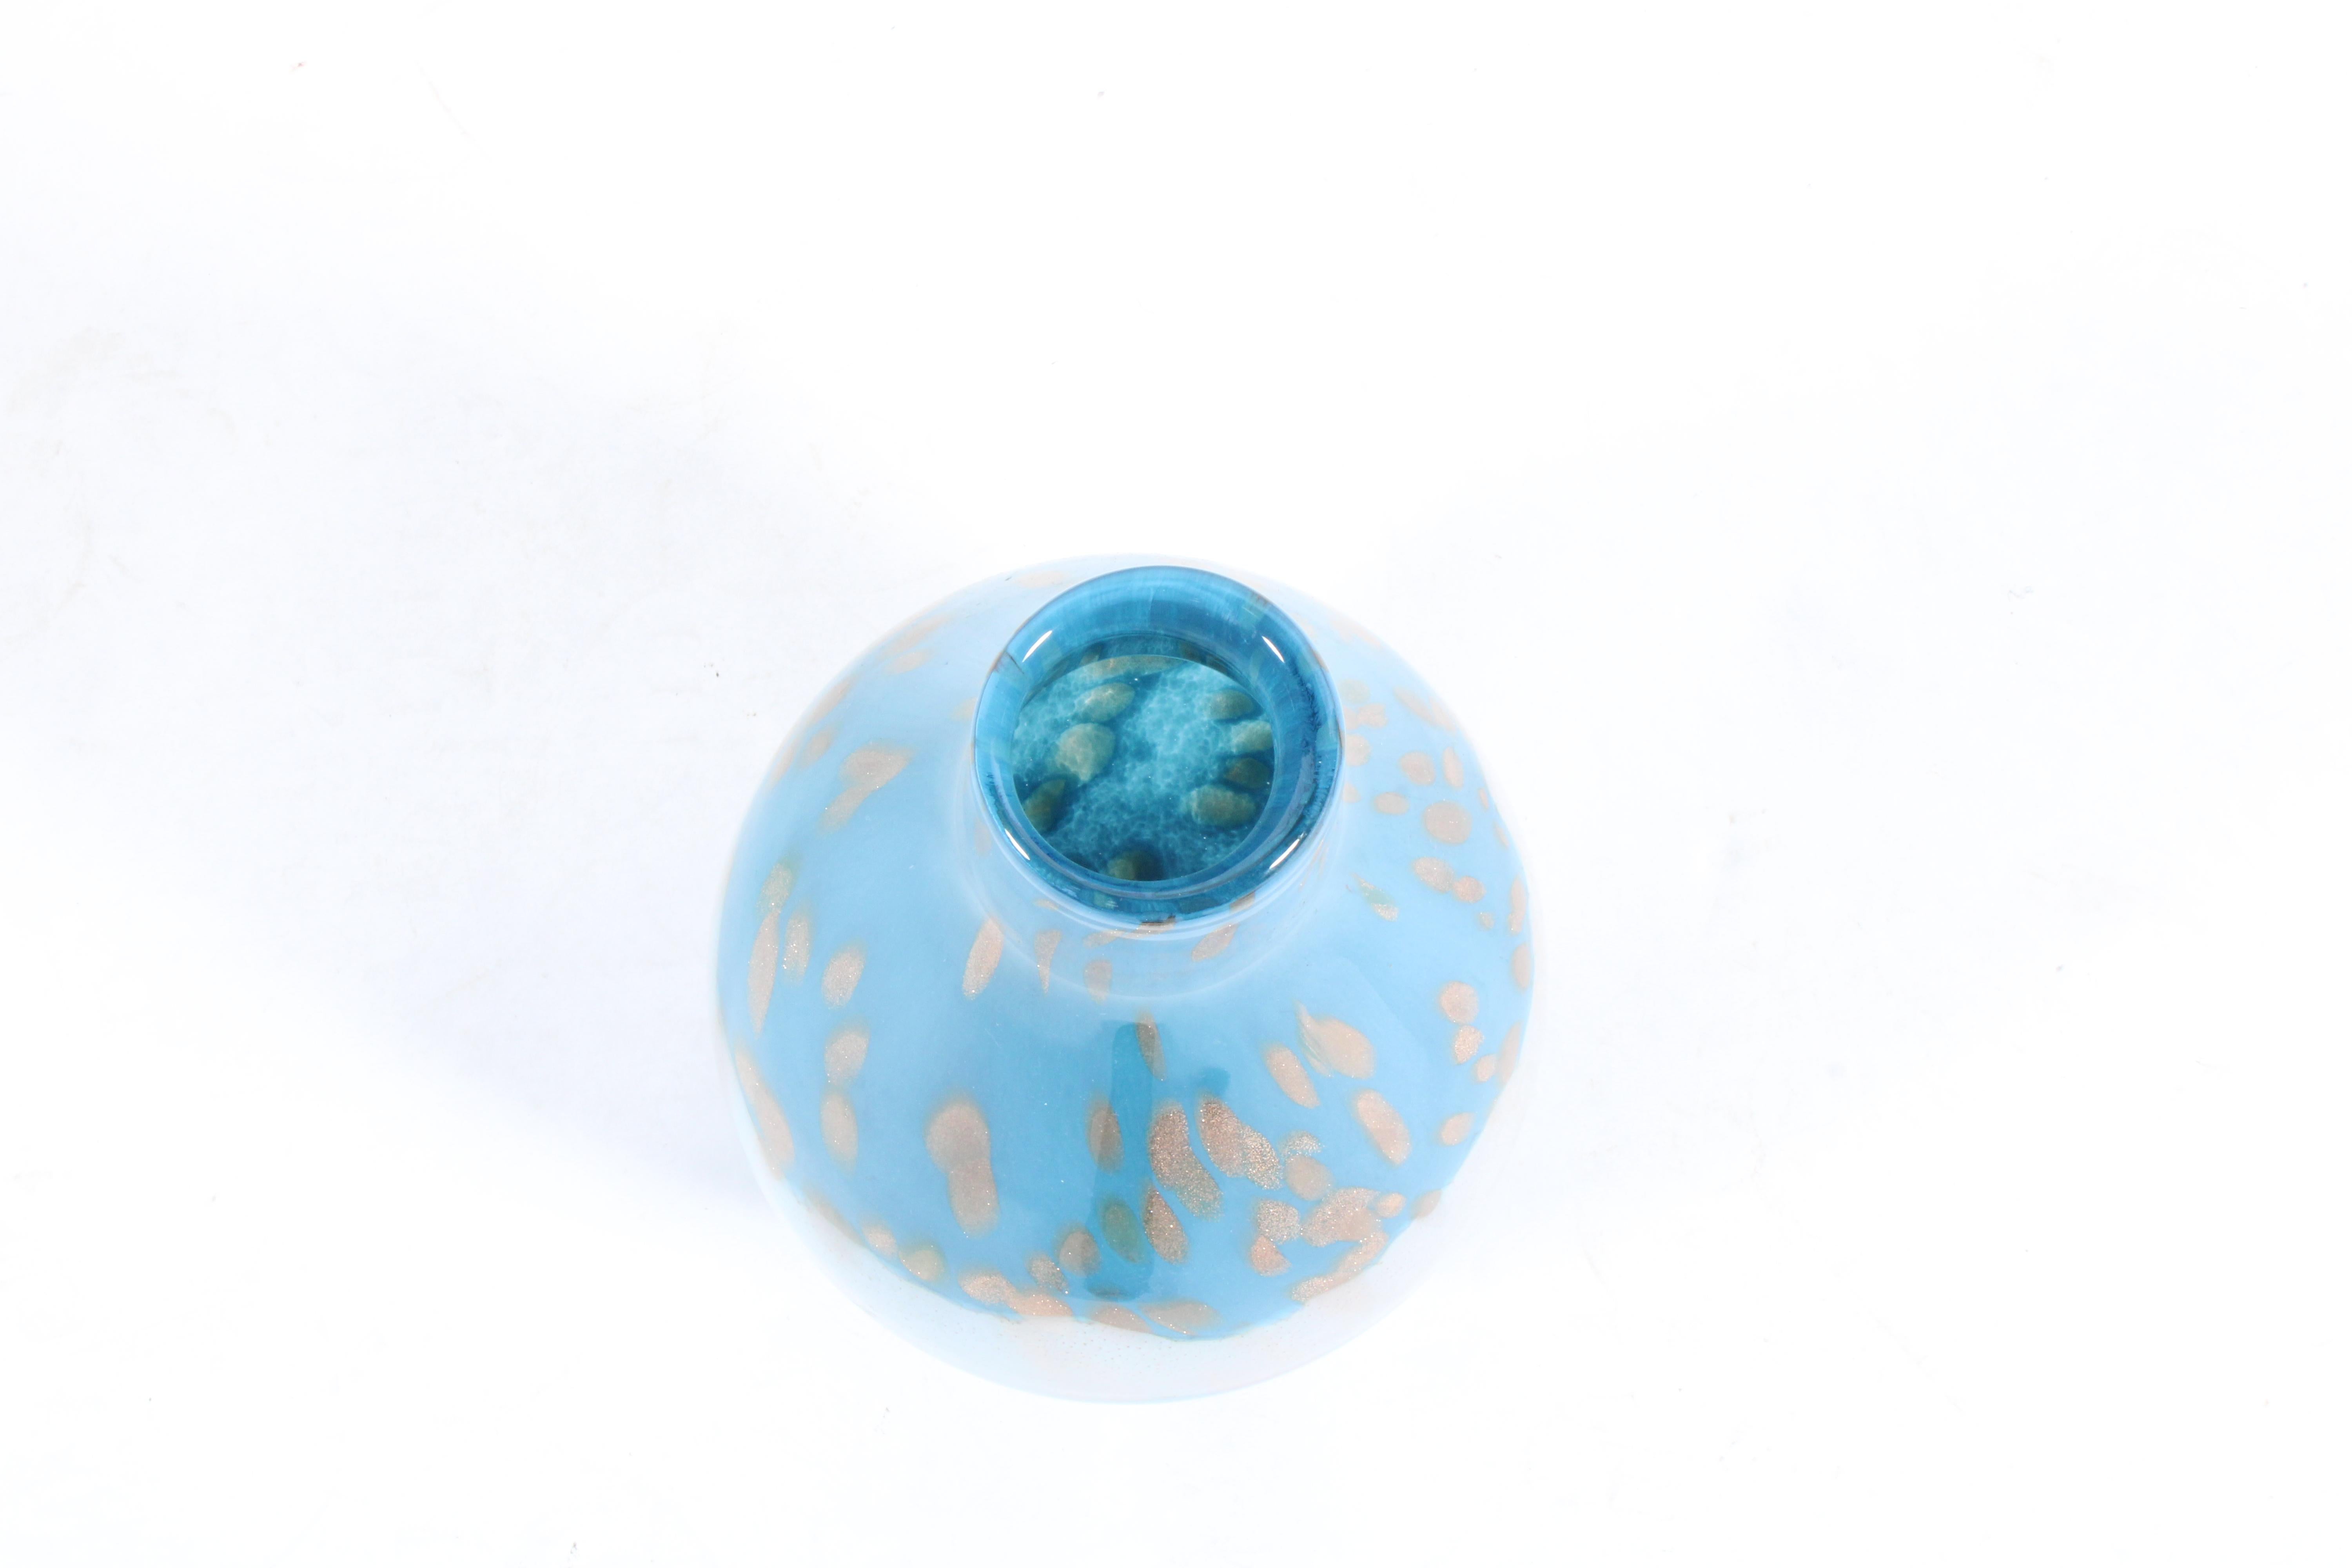 Stunning Vintage Italian blue, white and gold glass vase of a bulbous form . A gorgeous piece of home decor for table or sideboard styling in superb vintage condition.

Italian circa 1960